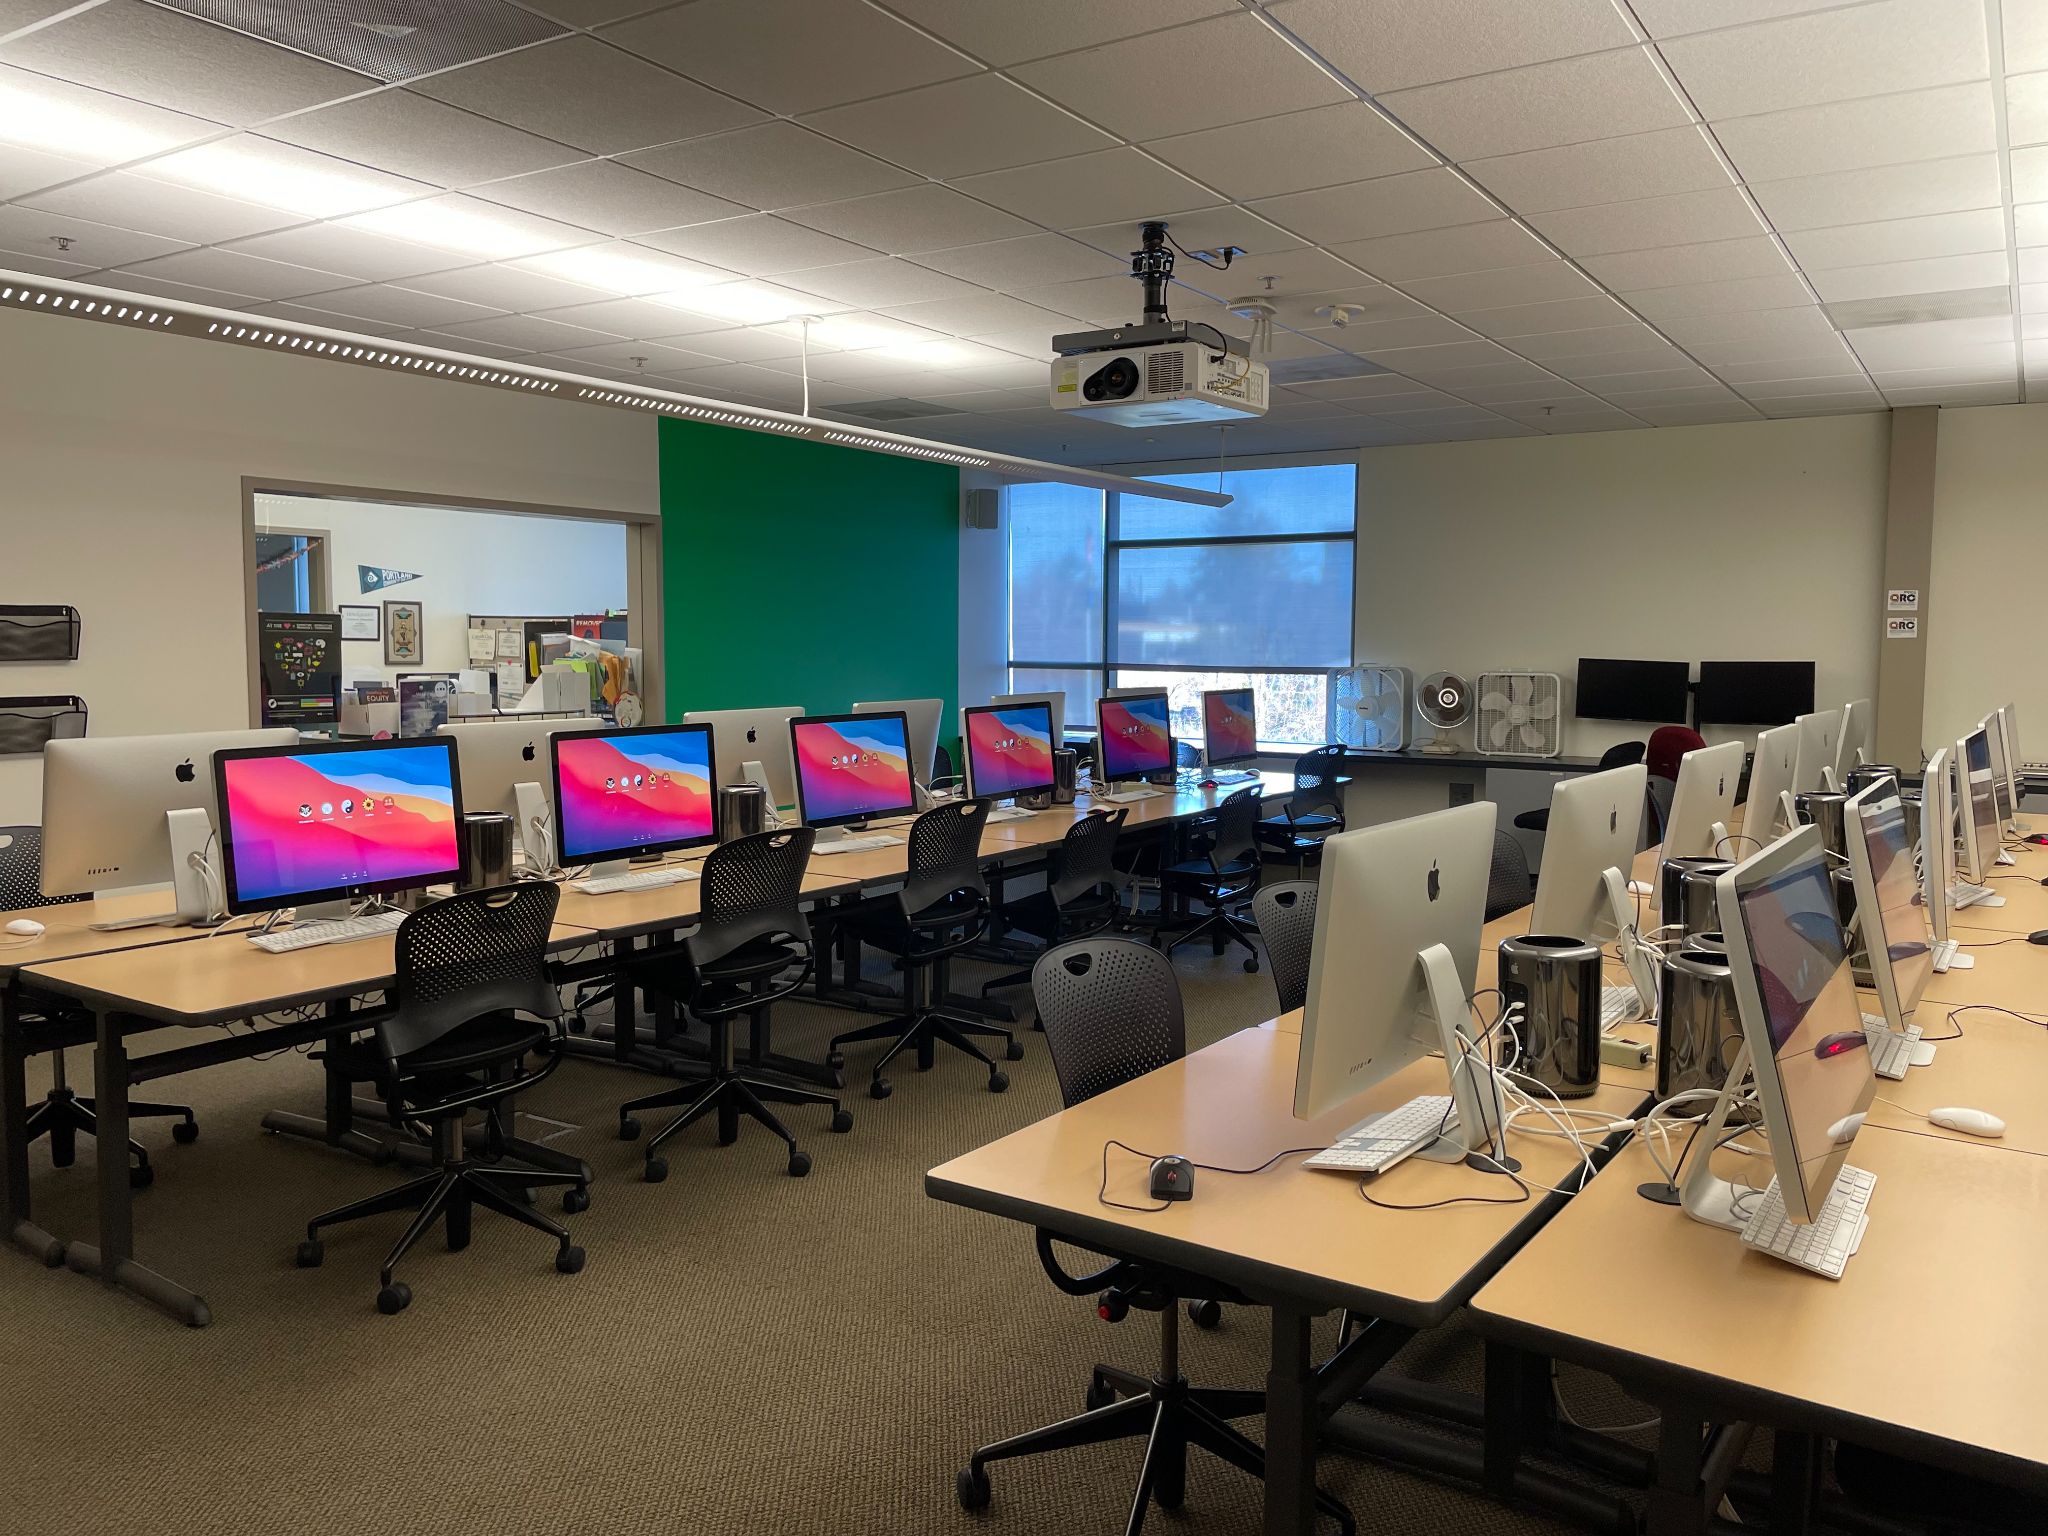 Mac Computer Labs in the Moriarty Building (MAHB)